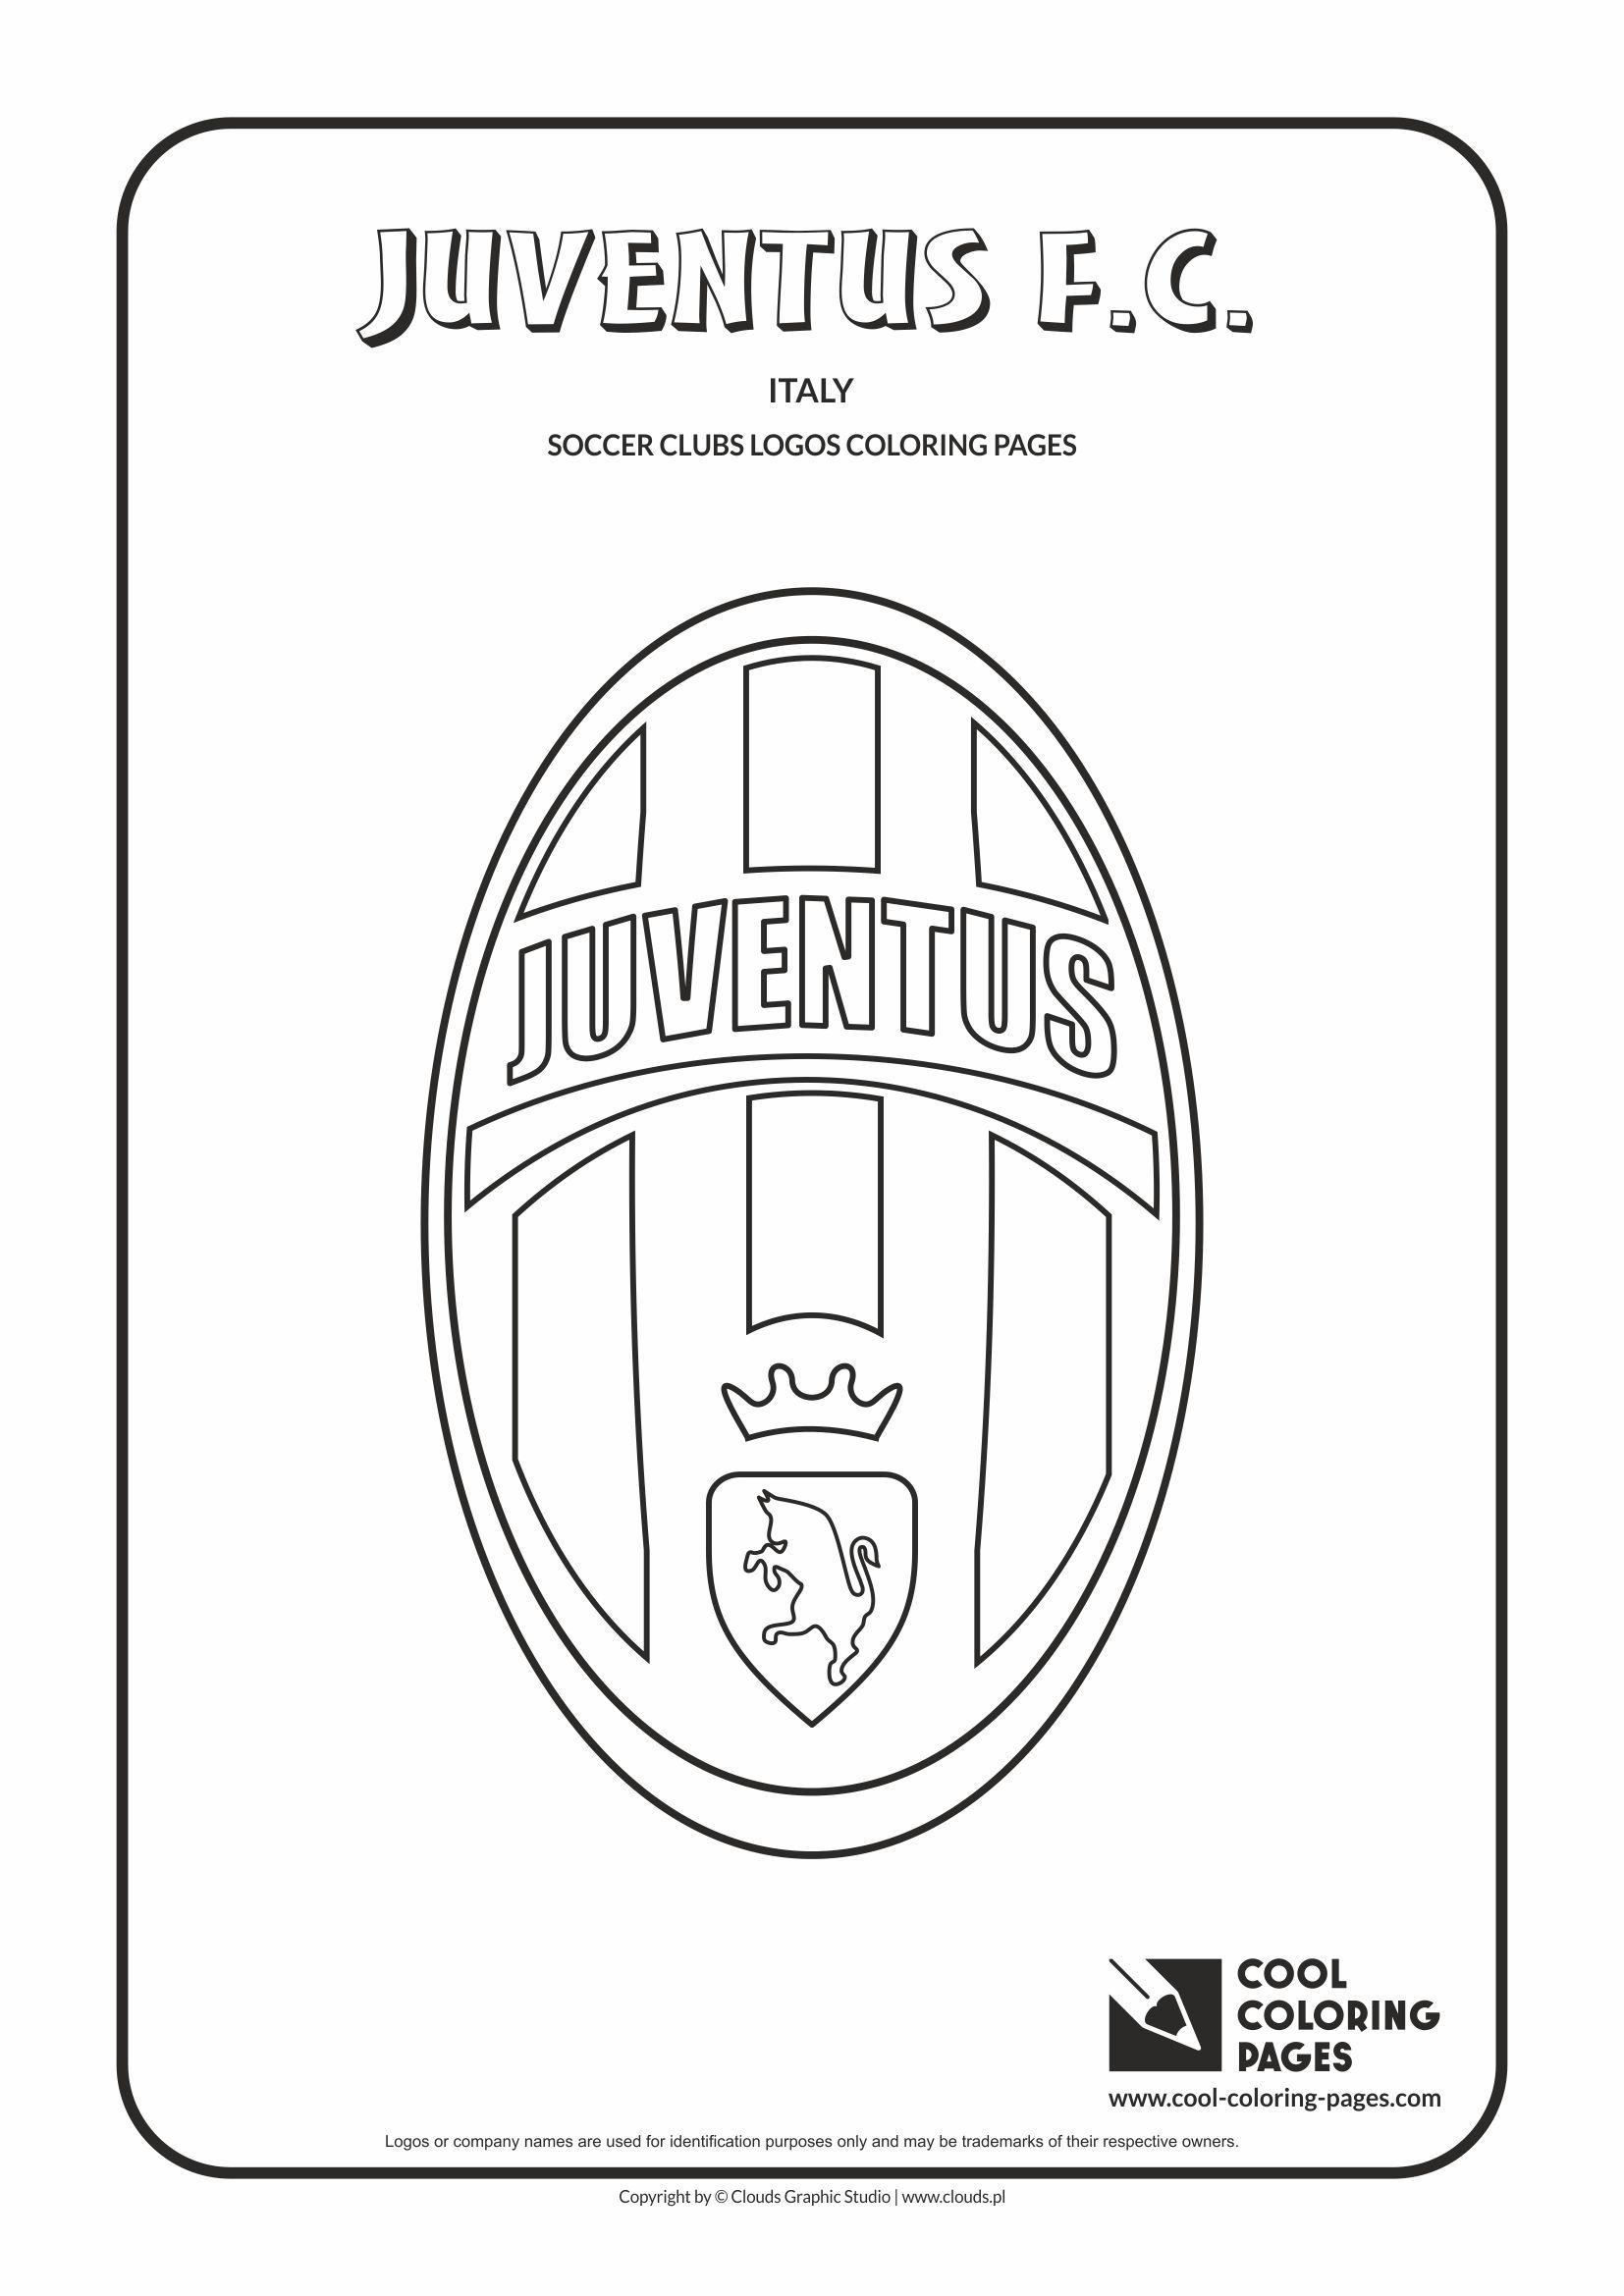 Cool Soccer Logo - Cool Coloring Pages Soccer clubs logos - Cool Coloring Pages | Free ...